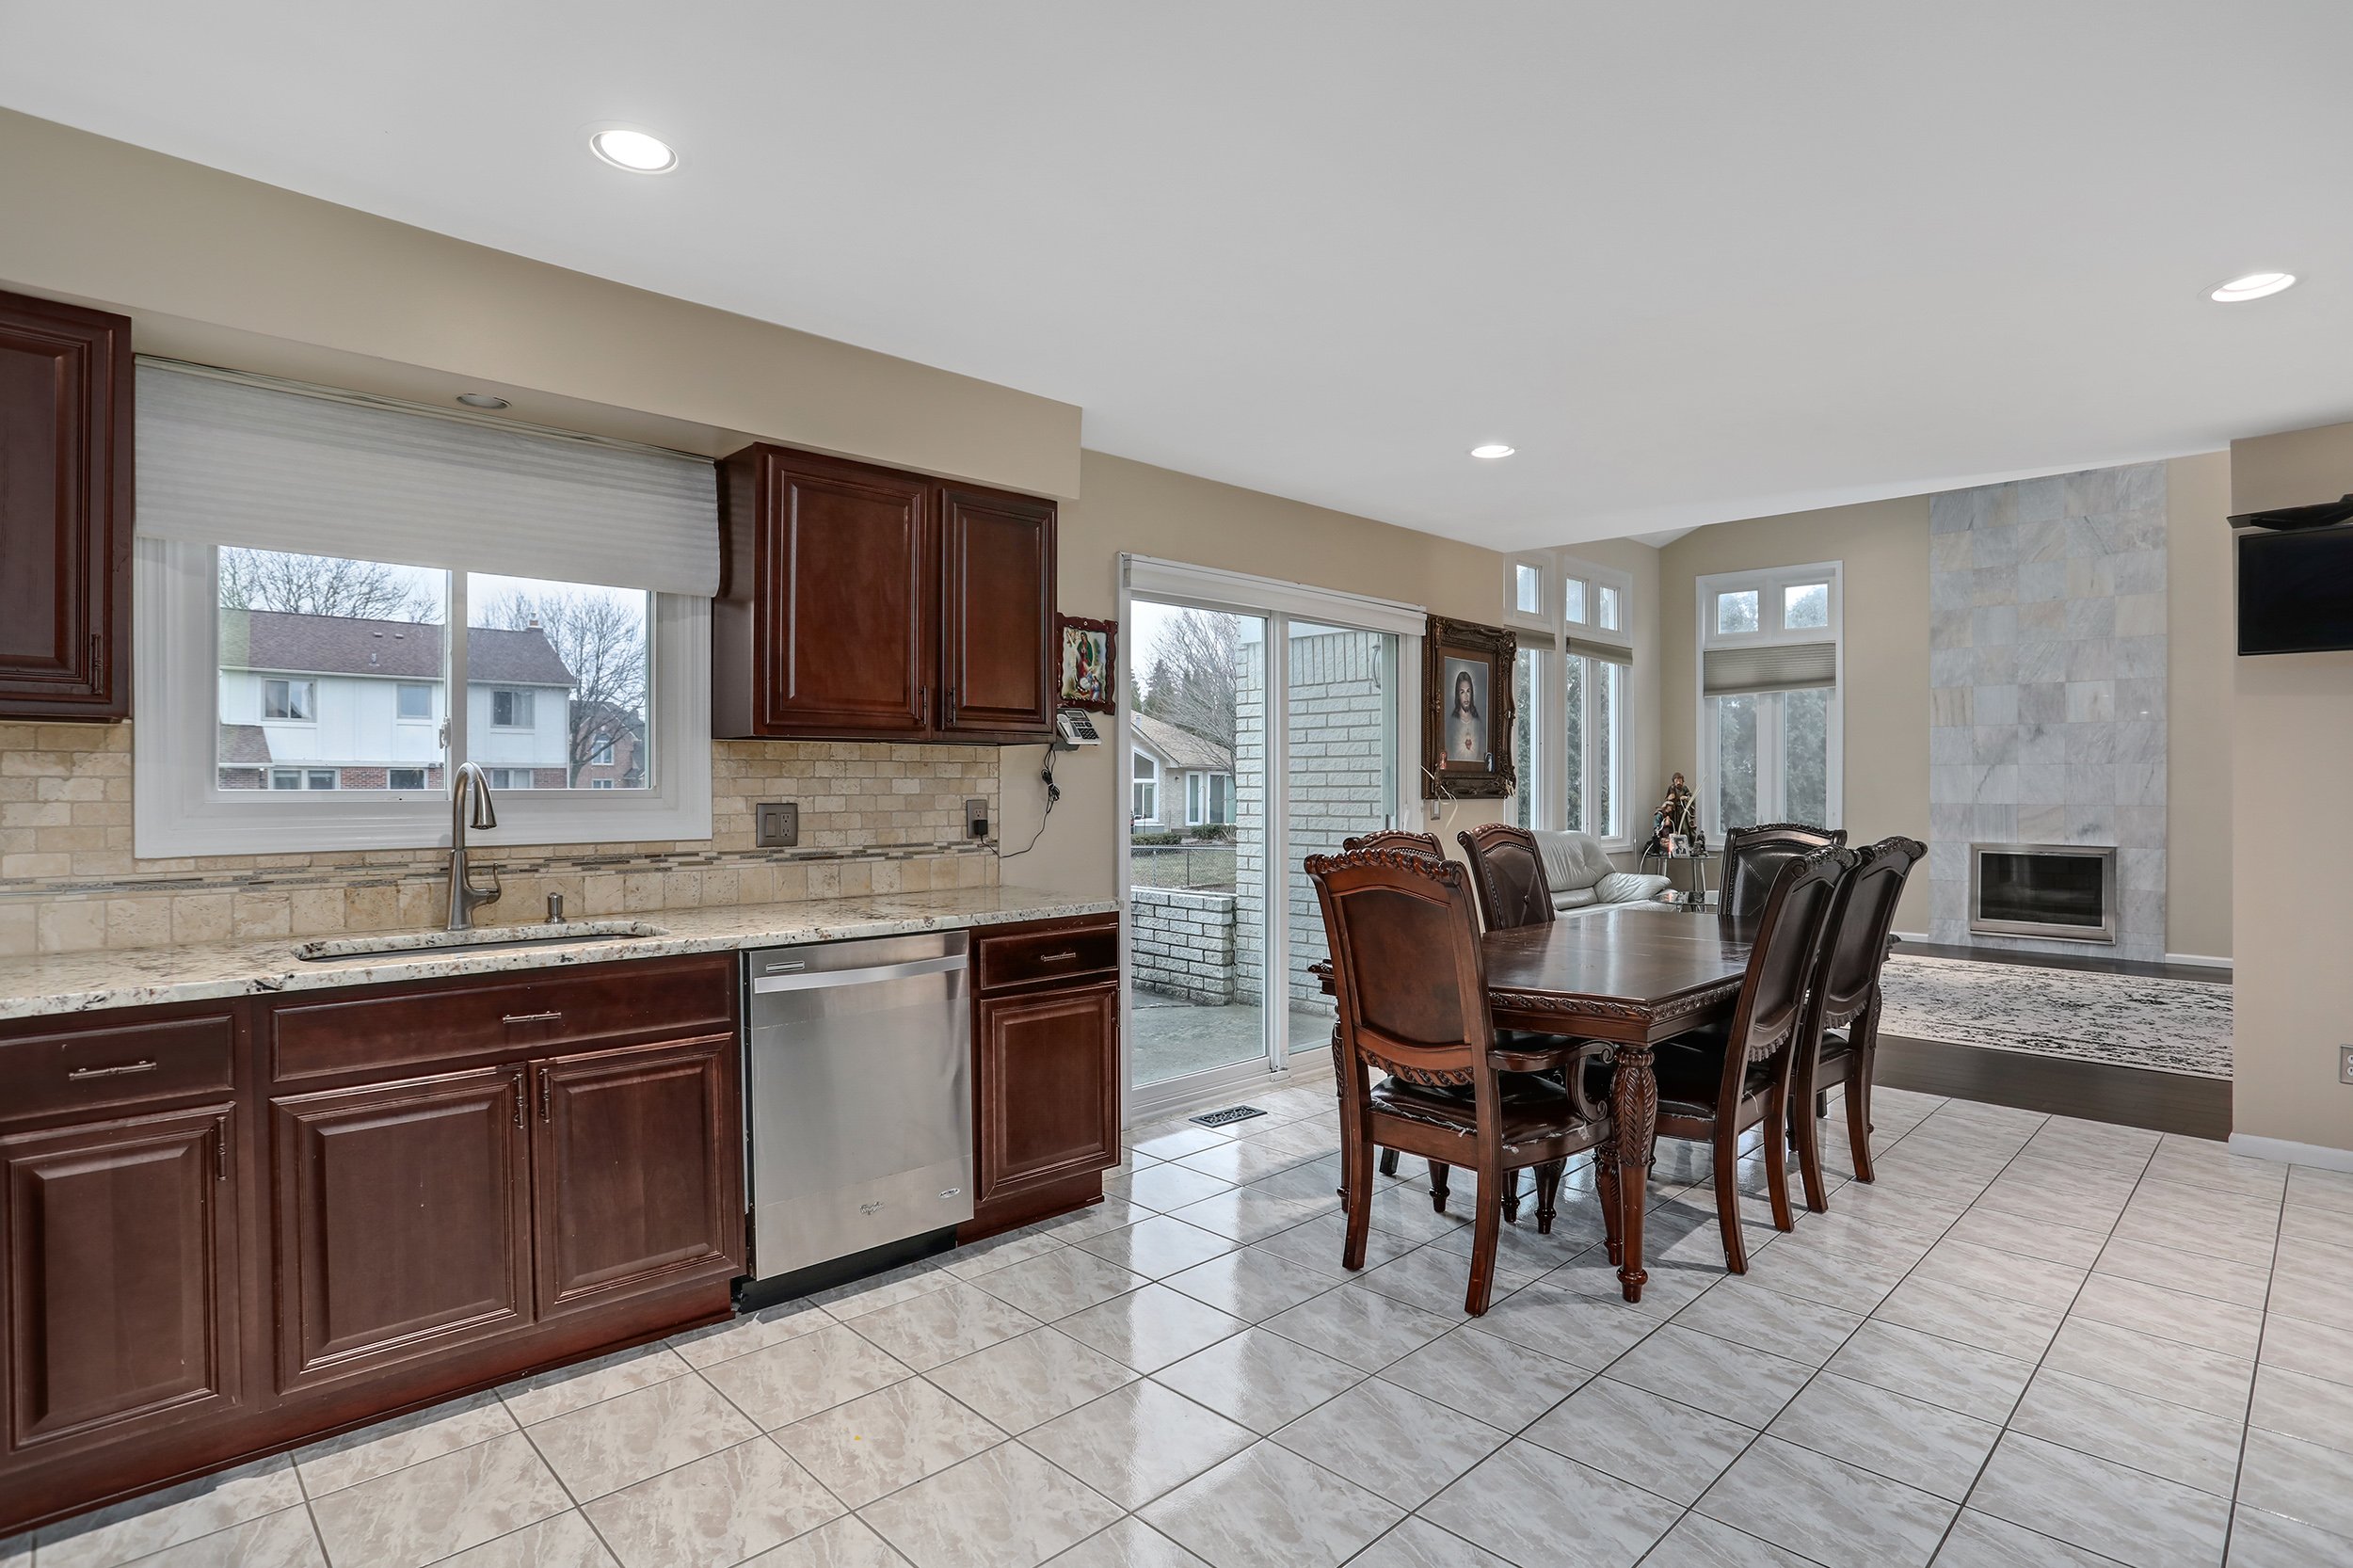  Sterling Heights Real Estate Photography - open kitchen dining room area 